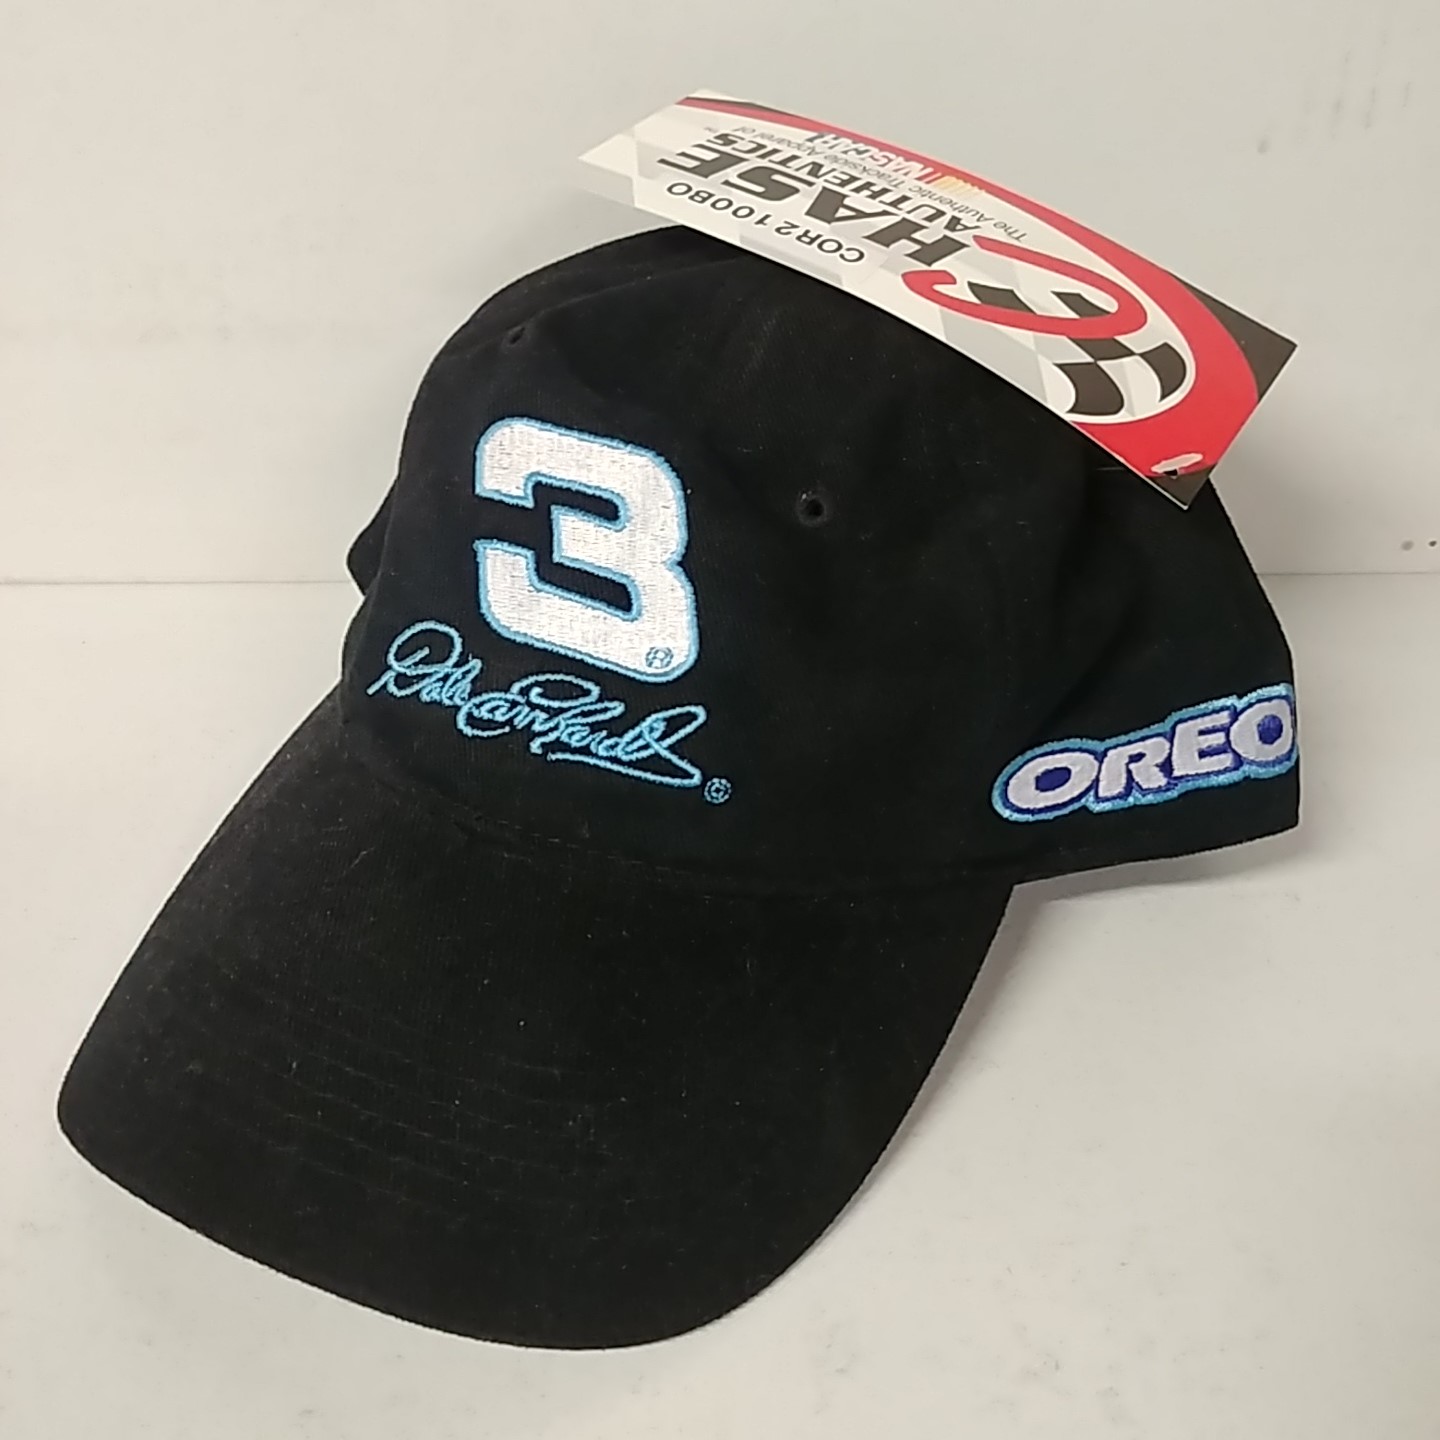 2001 Dale Earnhardt  Goodwrench "Oreo" low profile cap